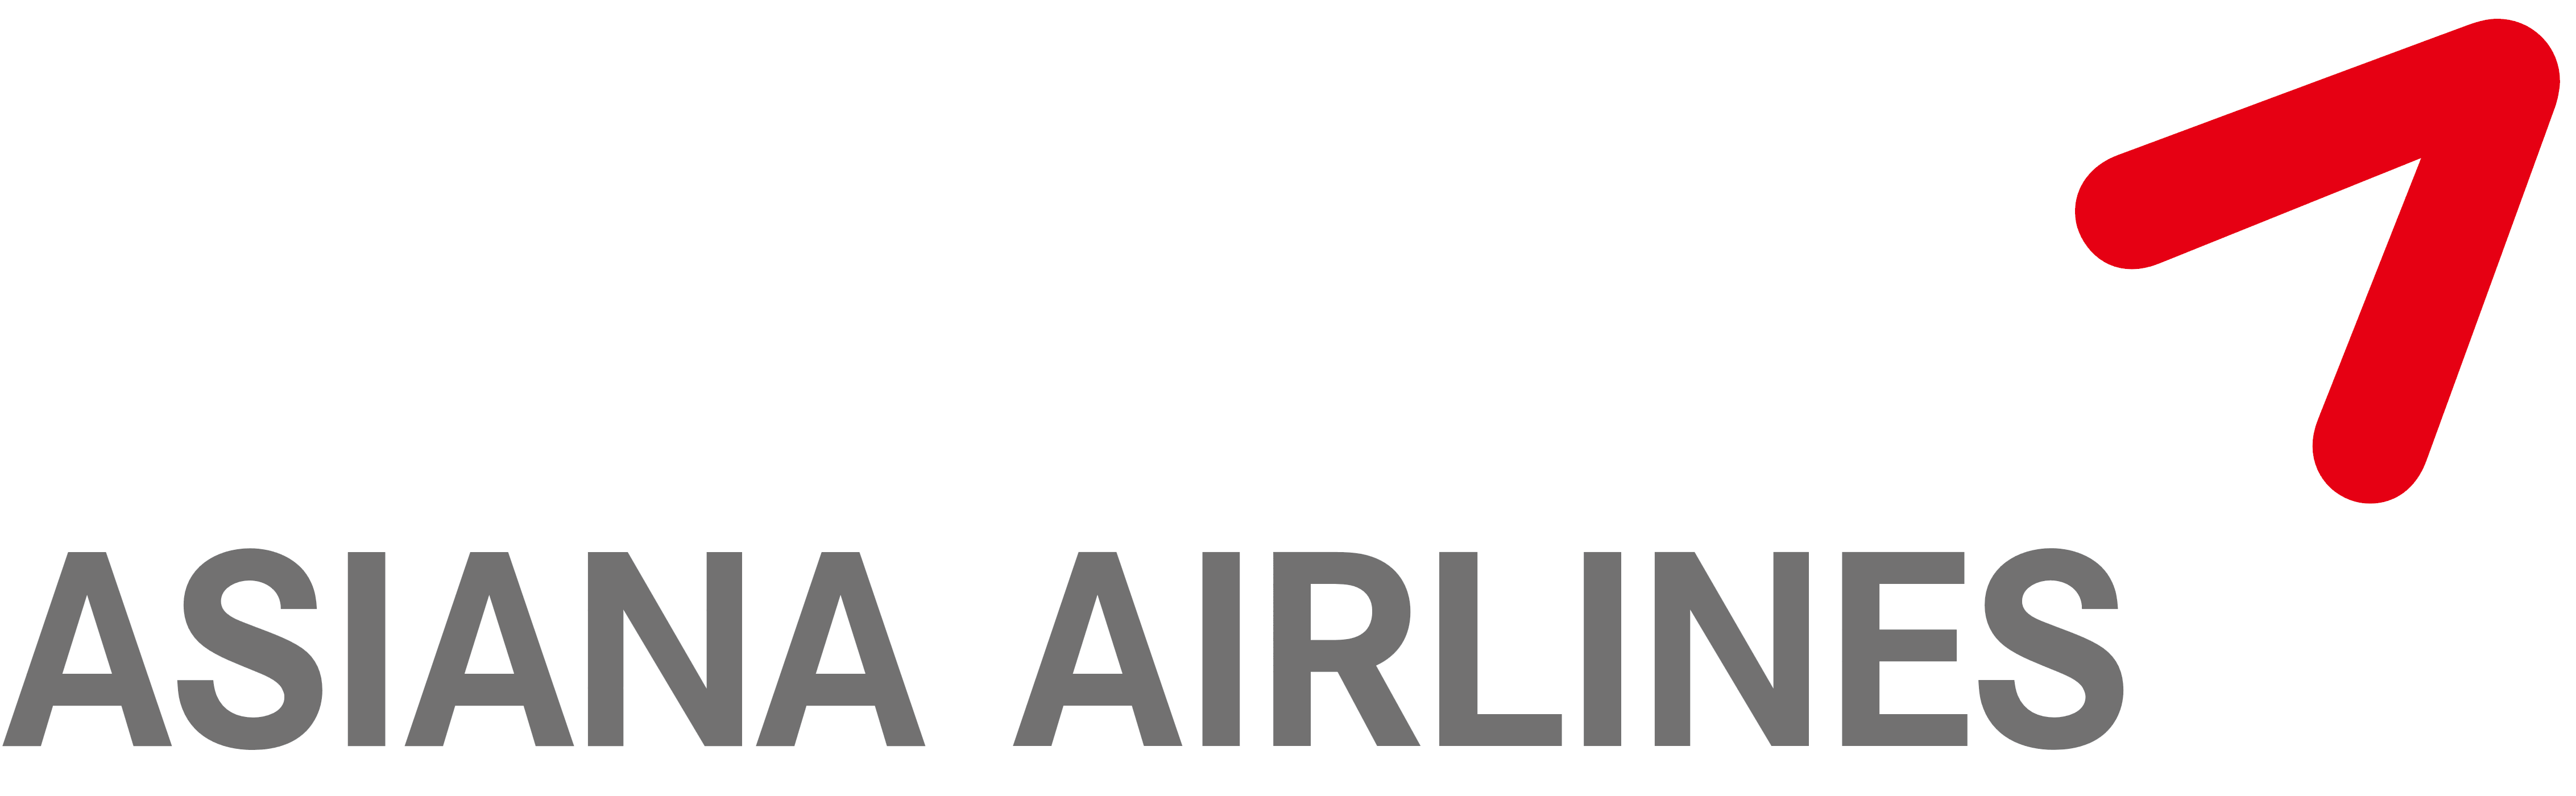 Asiana airlines logo free log